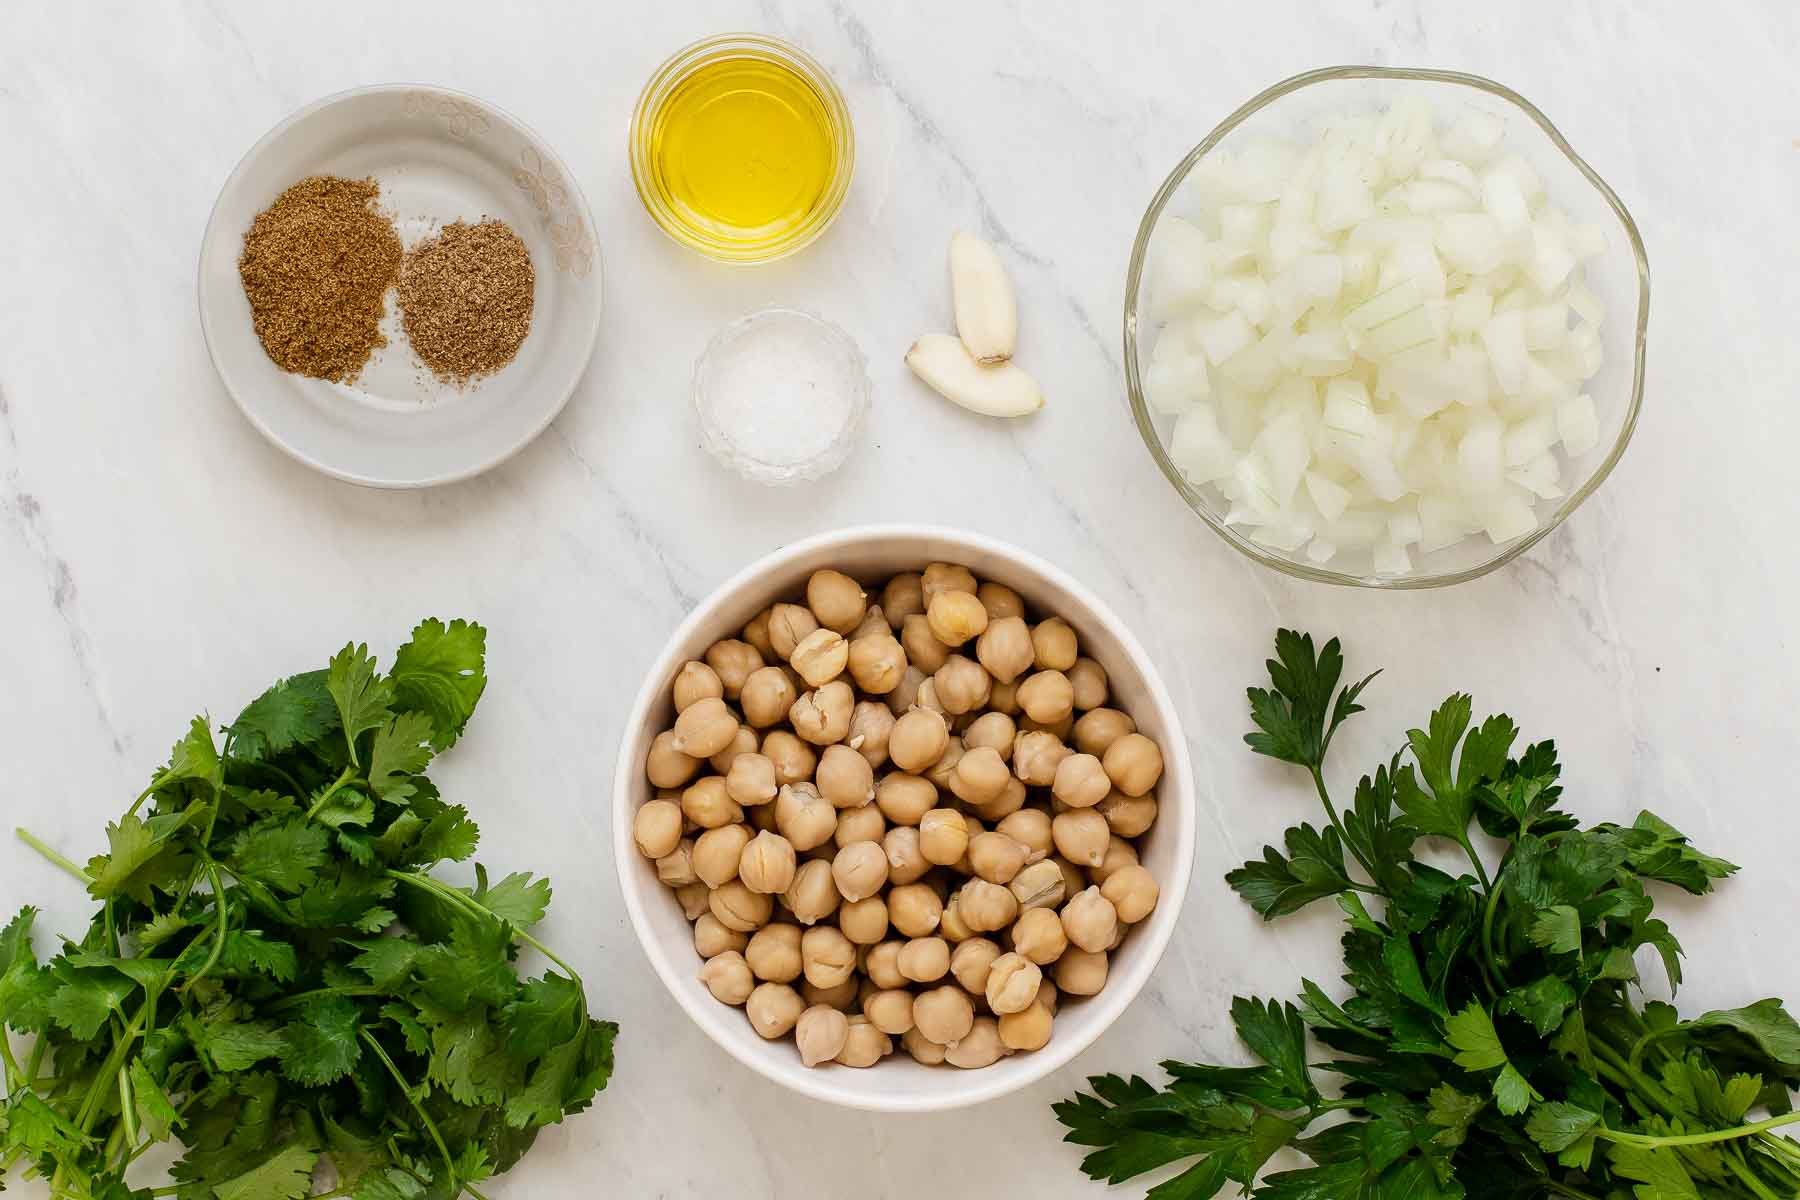 Chickpeas, spices, oil, chopped onion and herbs in small bowls on white counter.